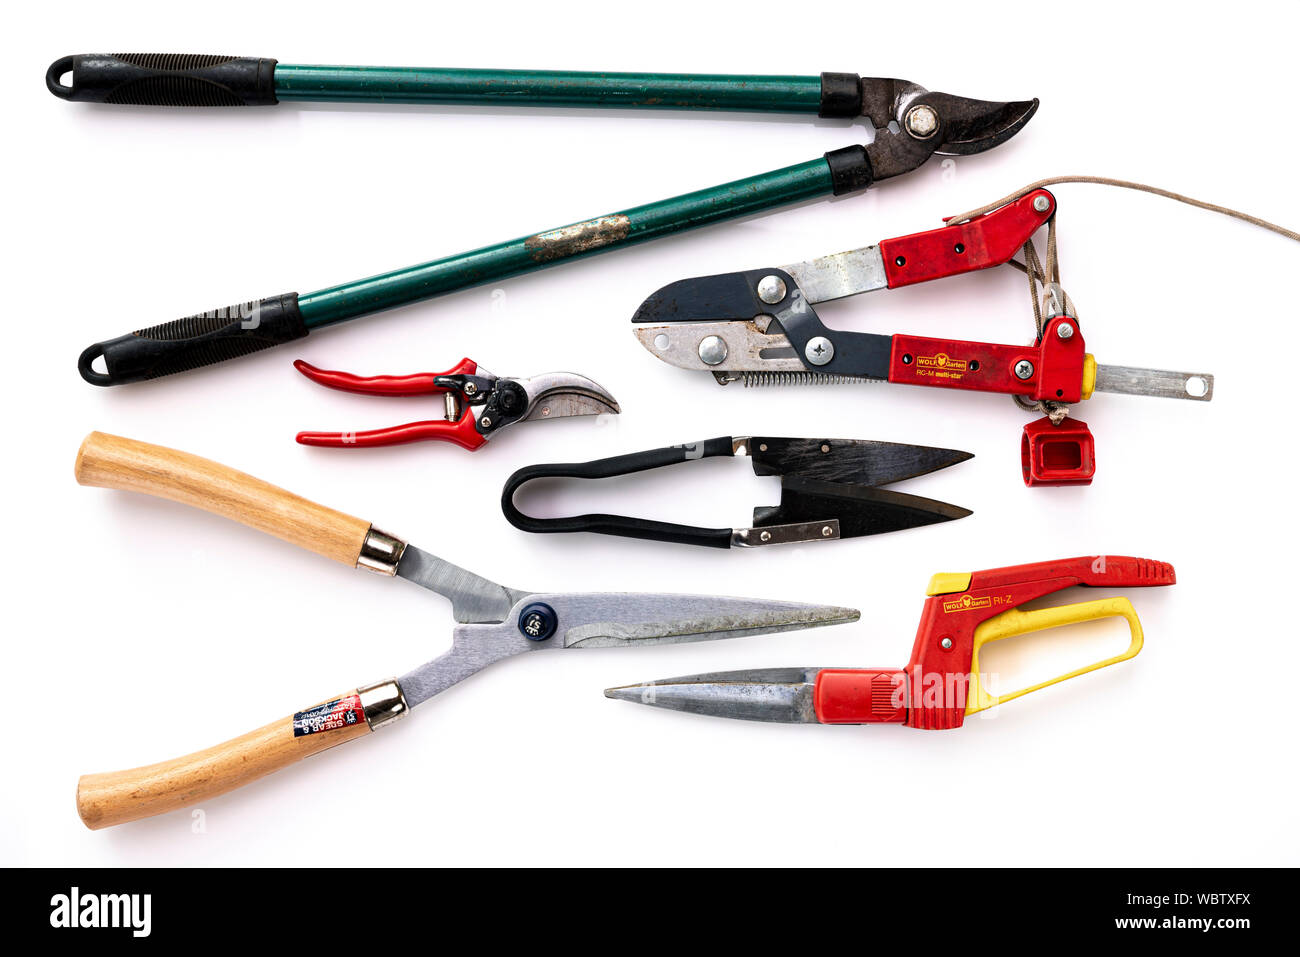 Selection of garden pruning tools. Stock Photo